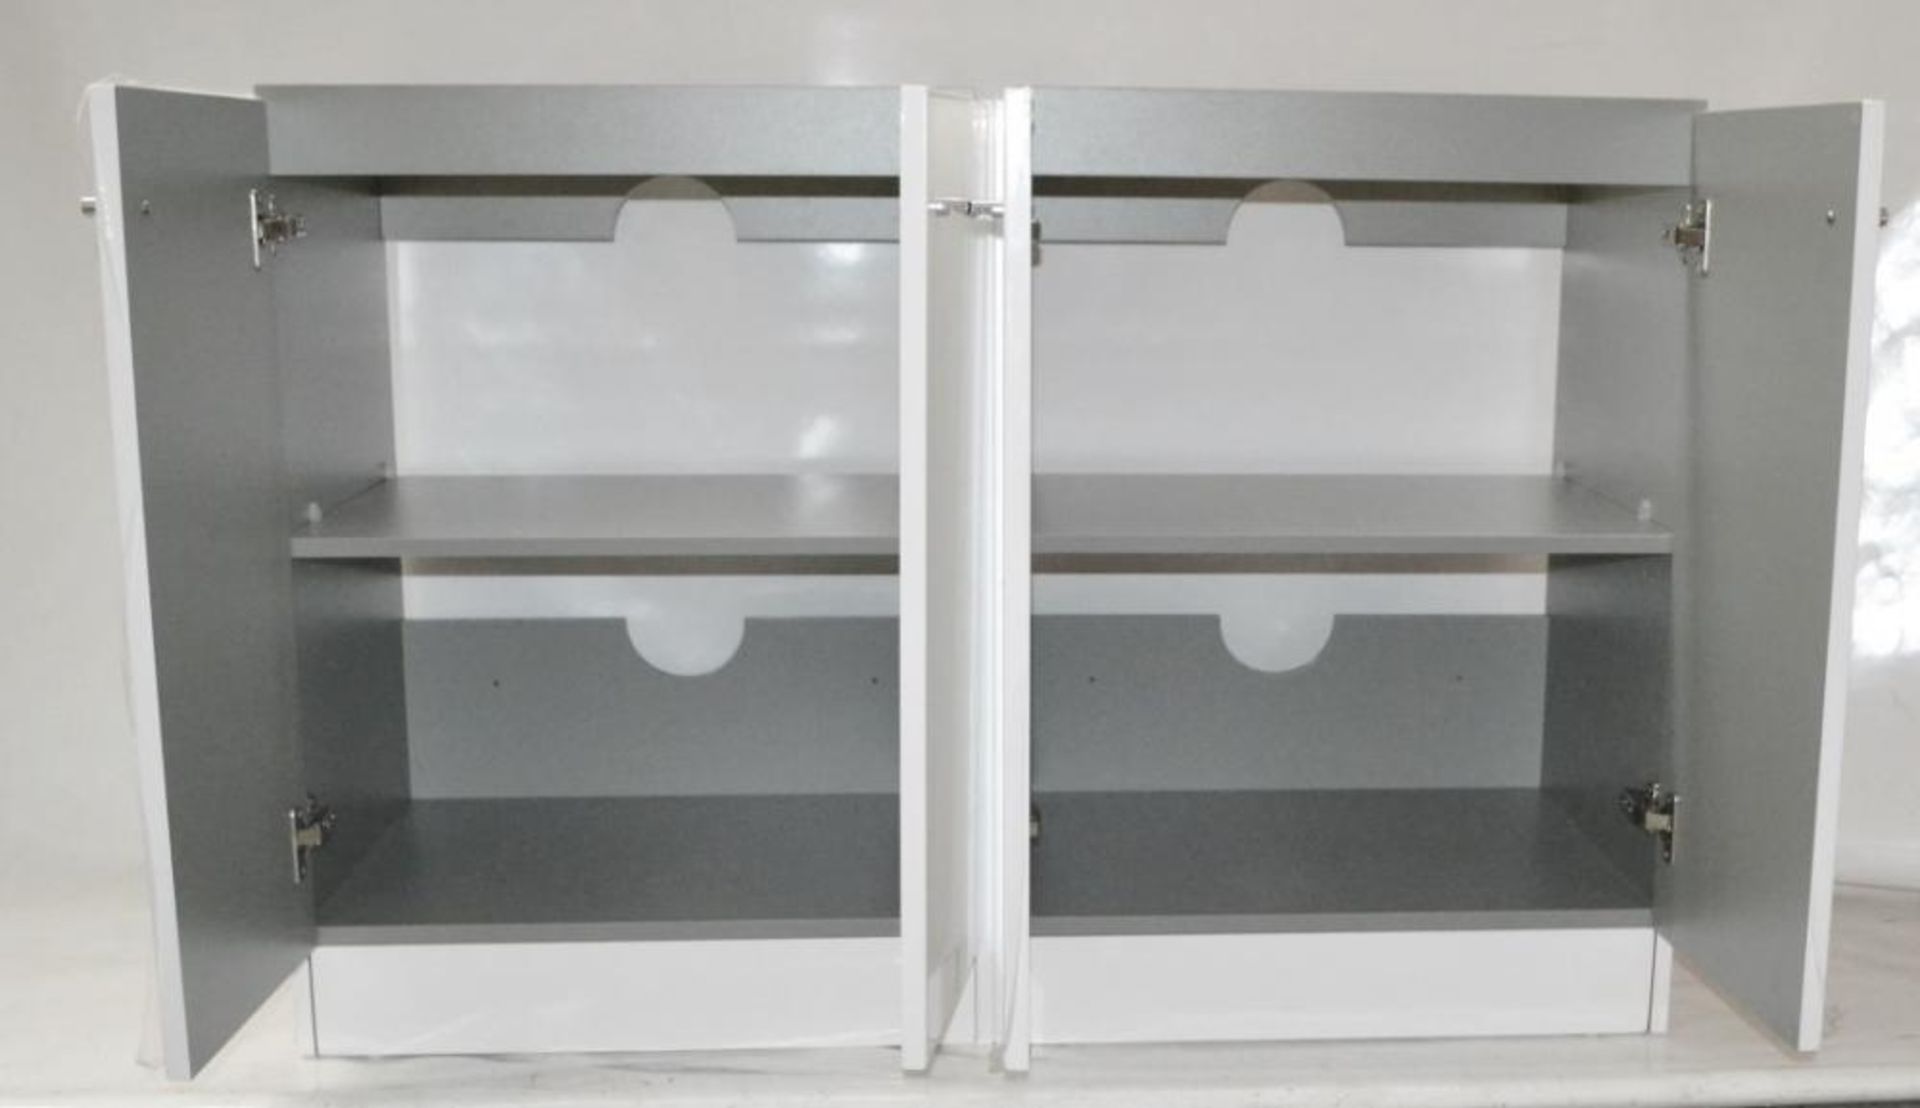 1 x Gloss White 1200mm 4-Door Double Basin Freestanding Bathroom Cabinet - New & Boxed Stock - CL307 - Image 7 of 8